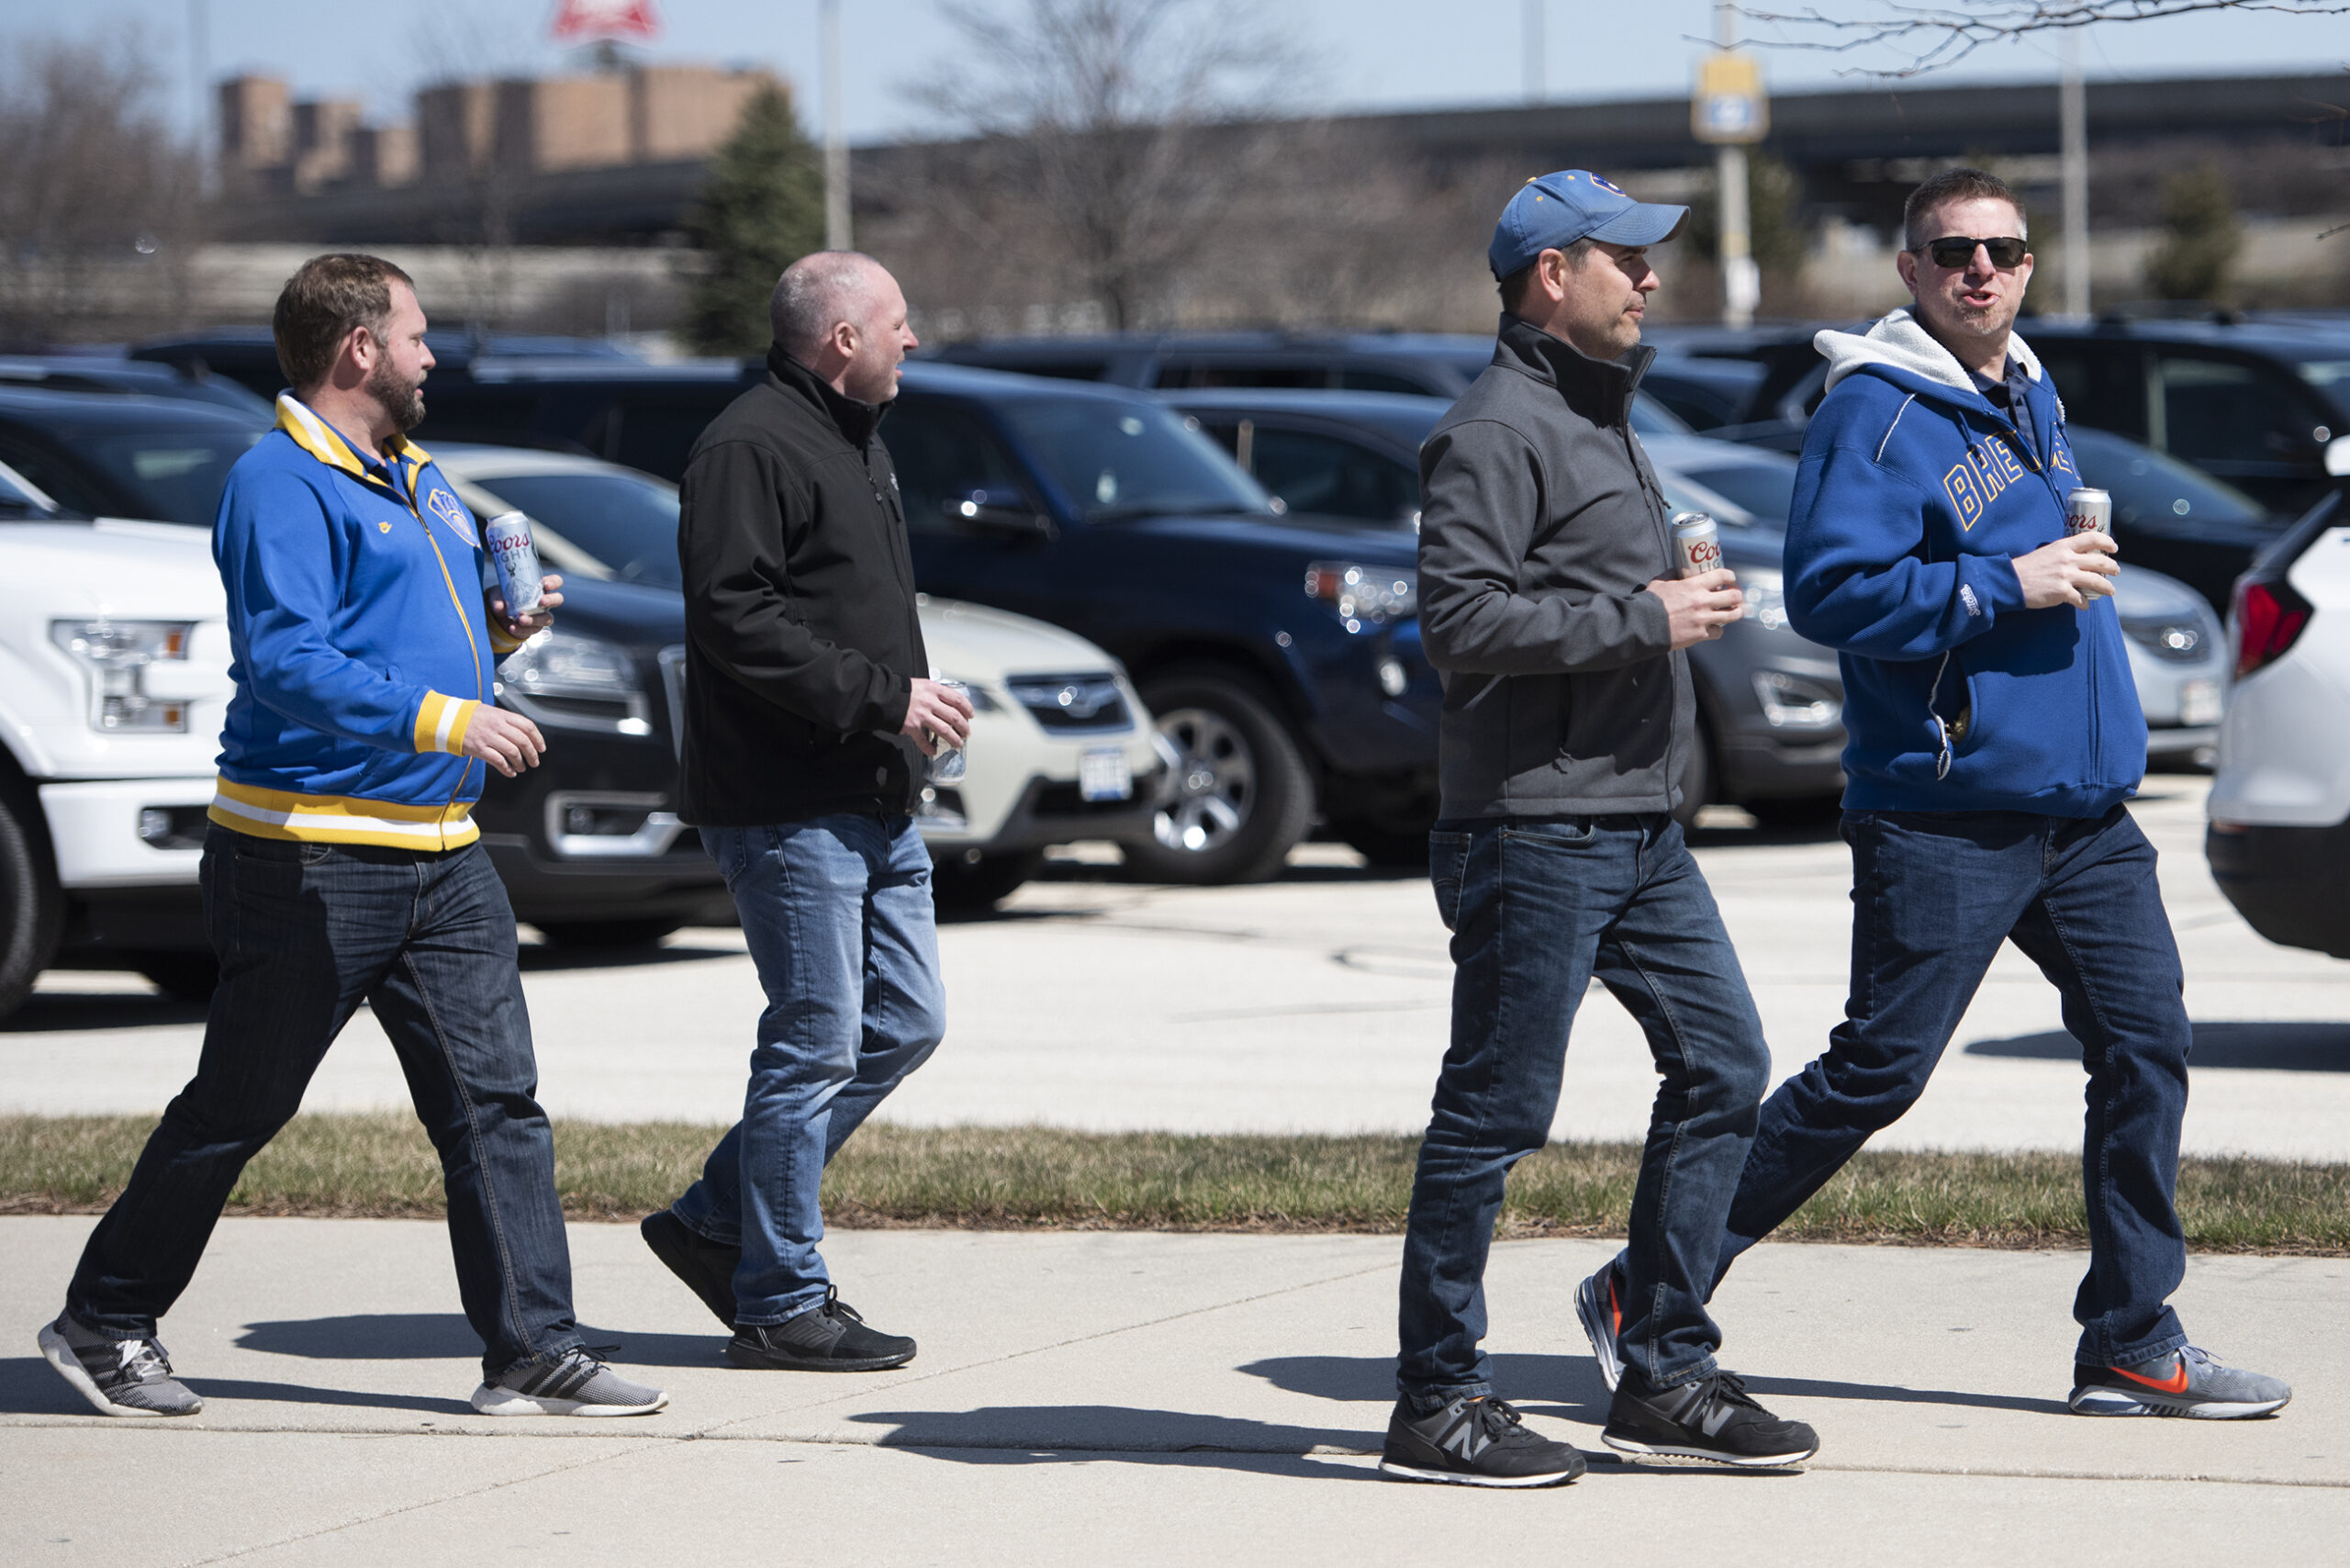 Four men hold cans of beer as they walk to the game.